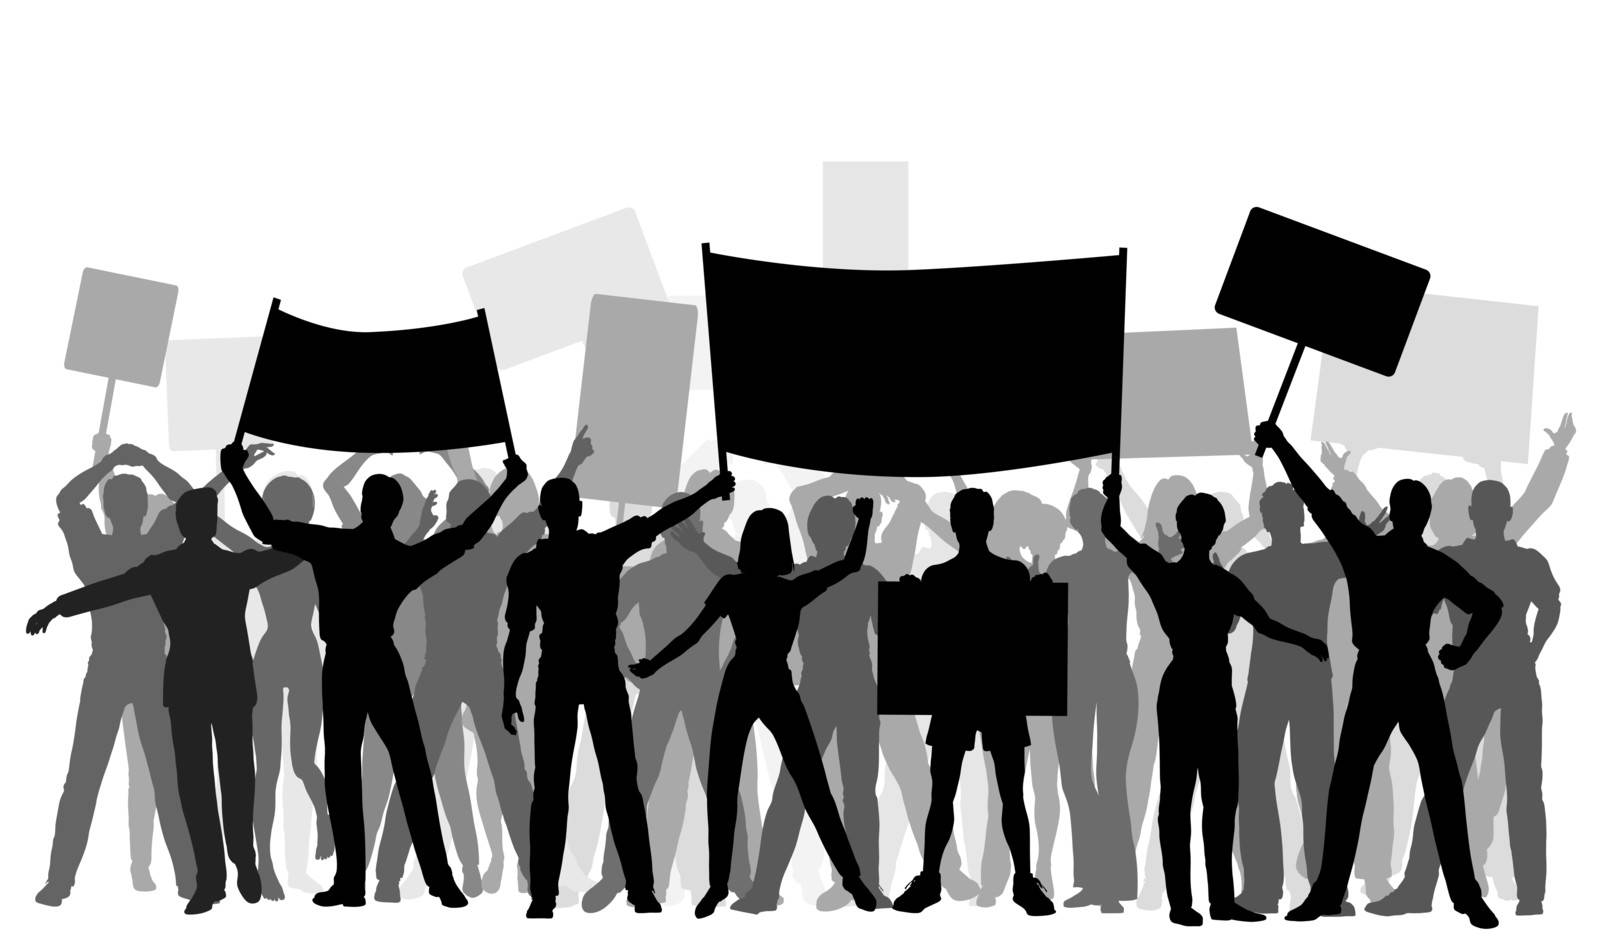 Editable vector silhouettes of protesters and banners with all elements as separate objects. Hi-res jpeg file included.